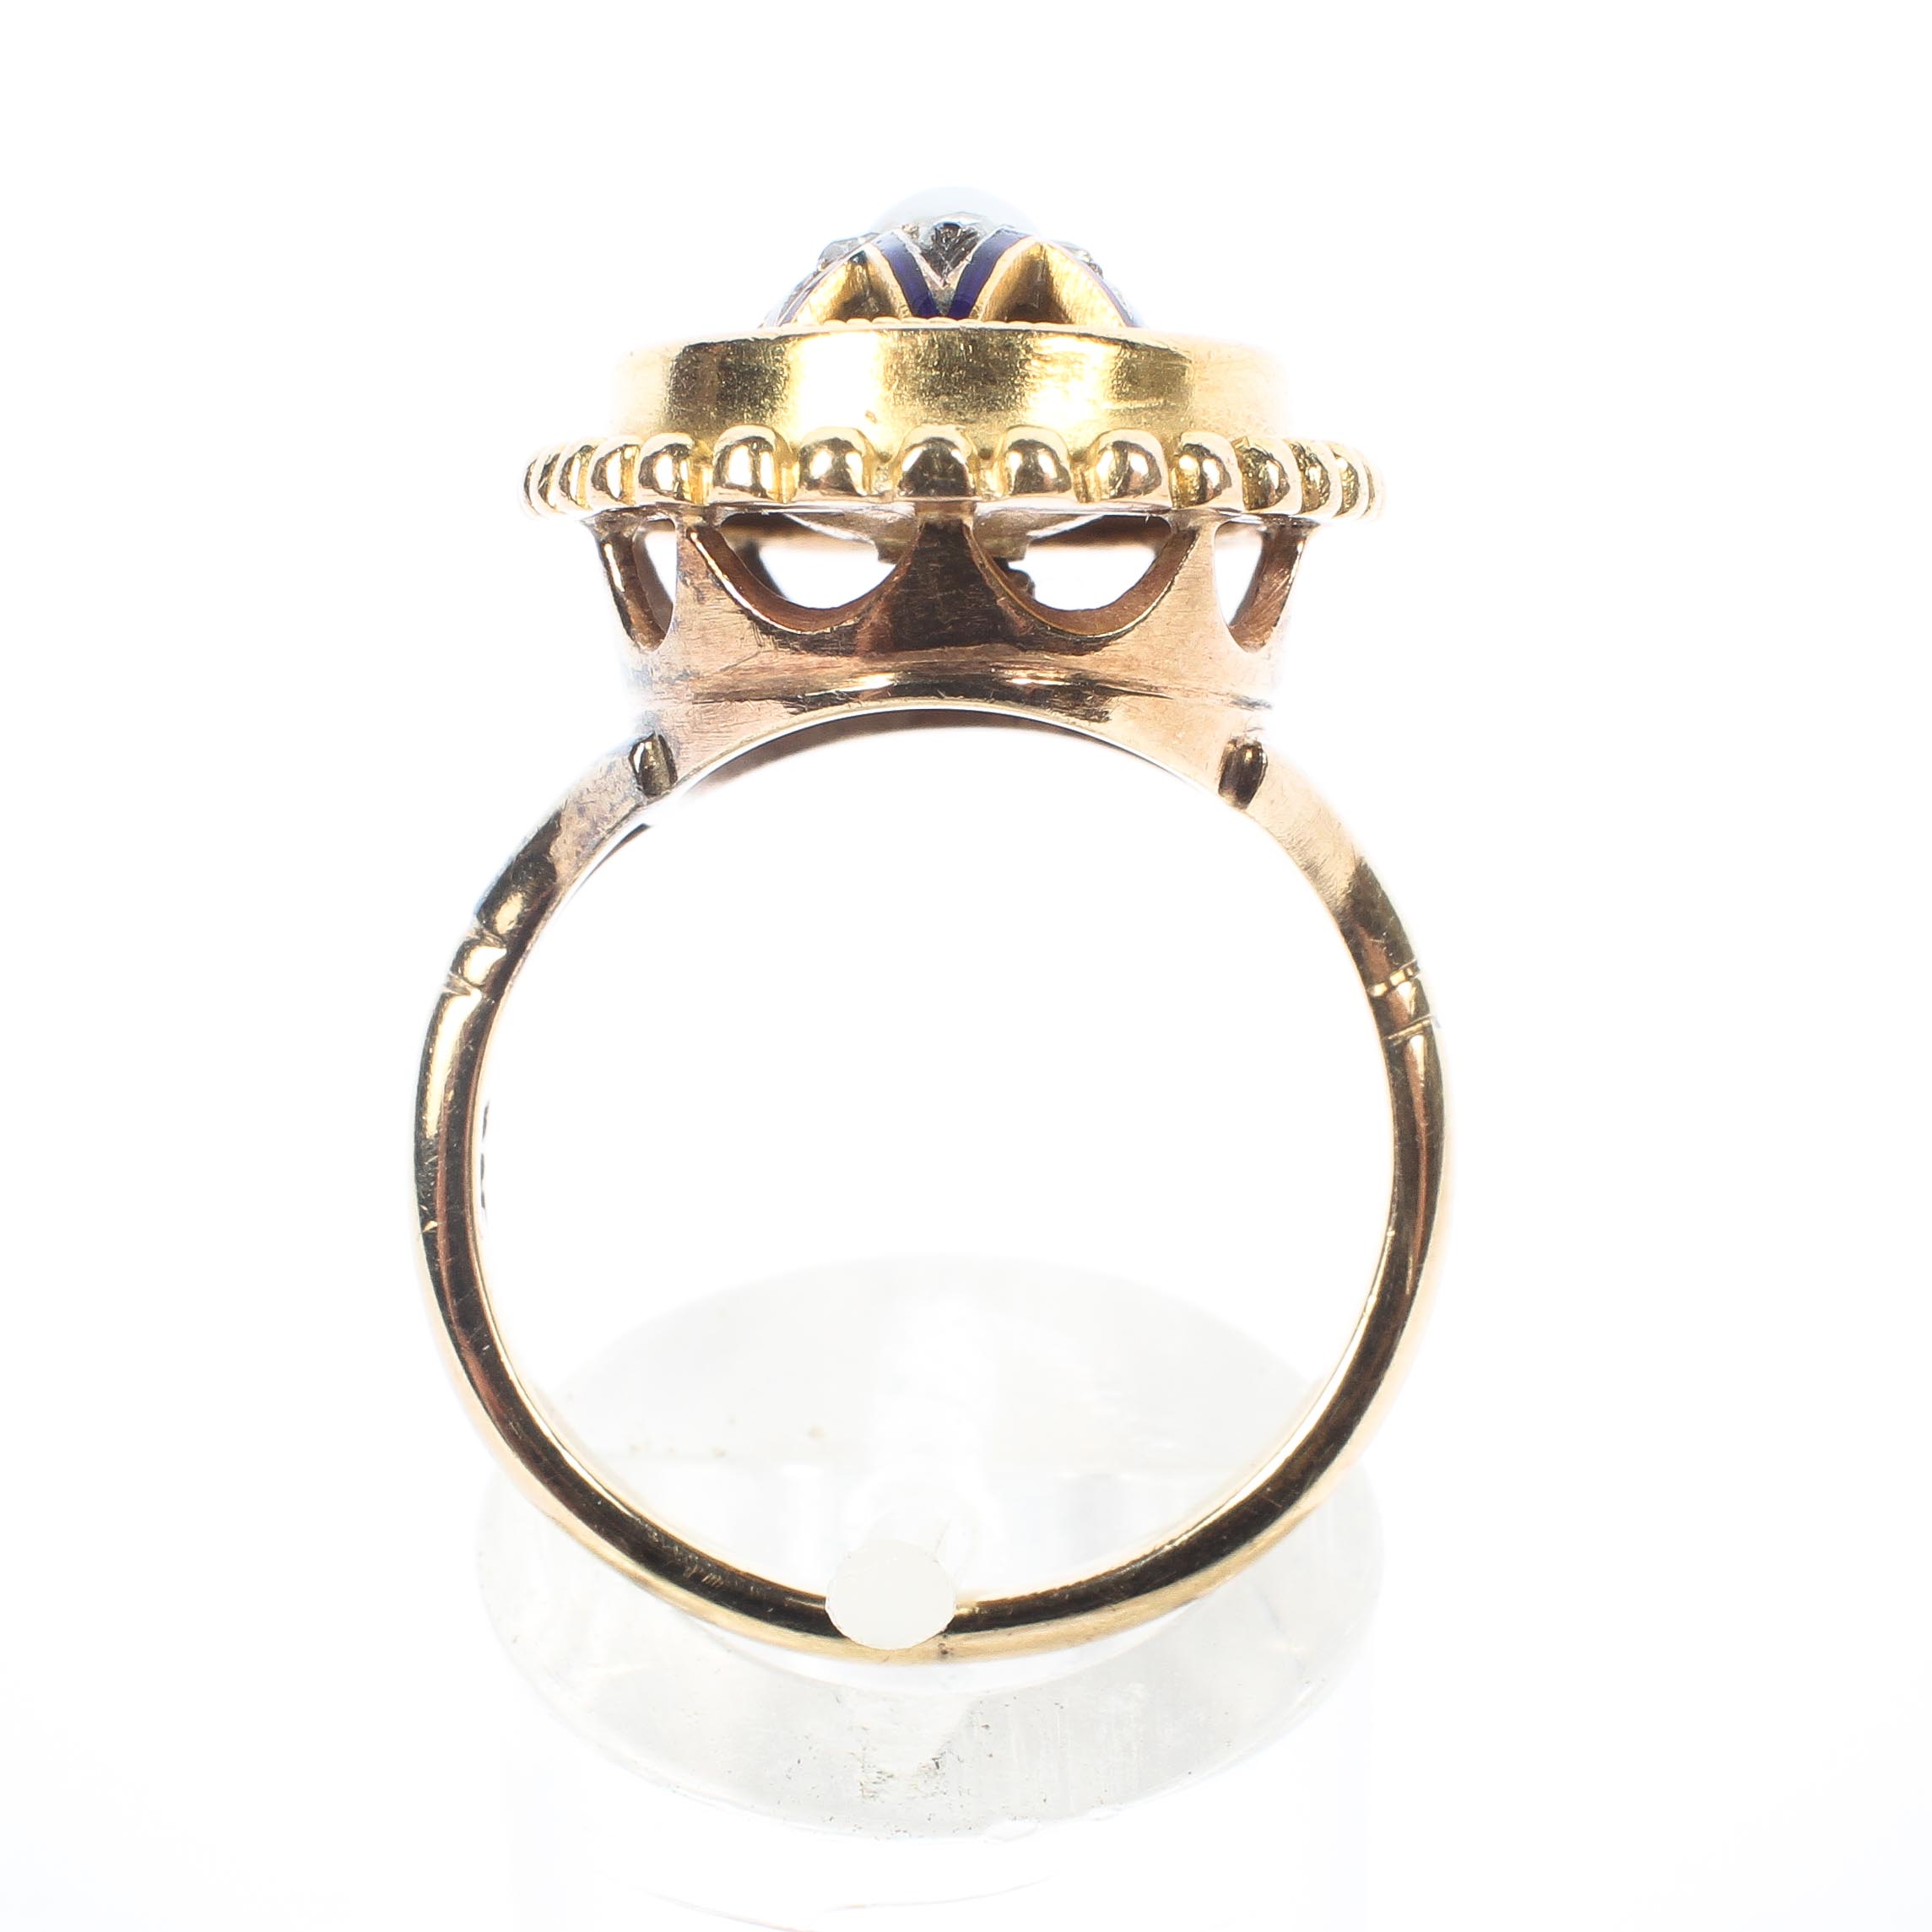 A Victorian 9ct gold ring, central pearl with a surround of rose cut diamonds and enamel detail. - Image 3 of 4